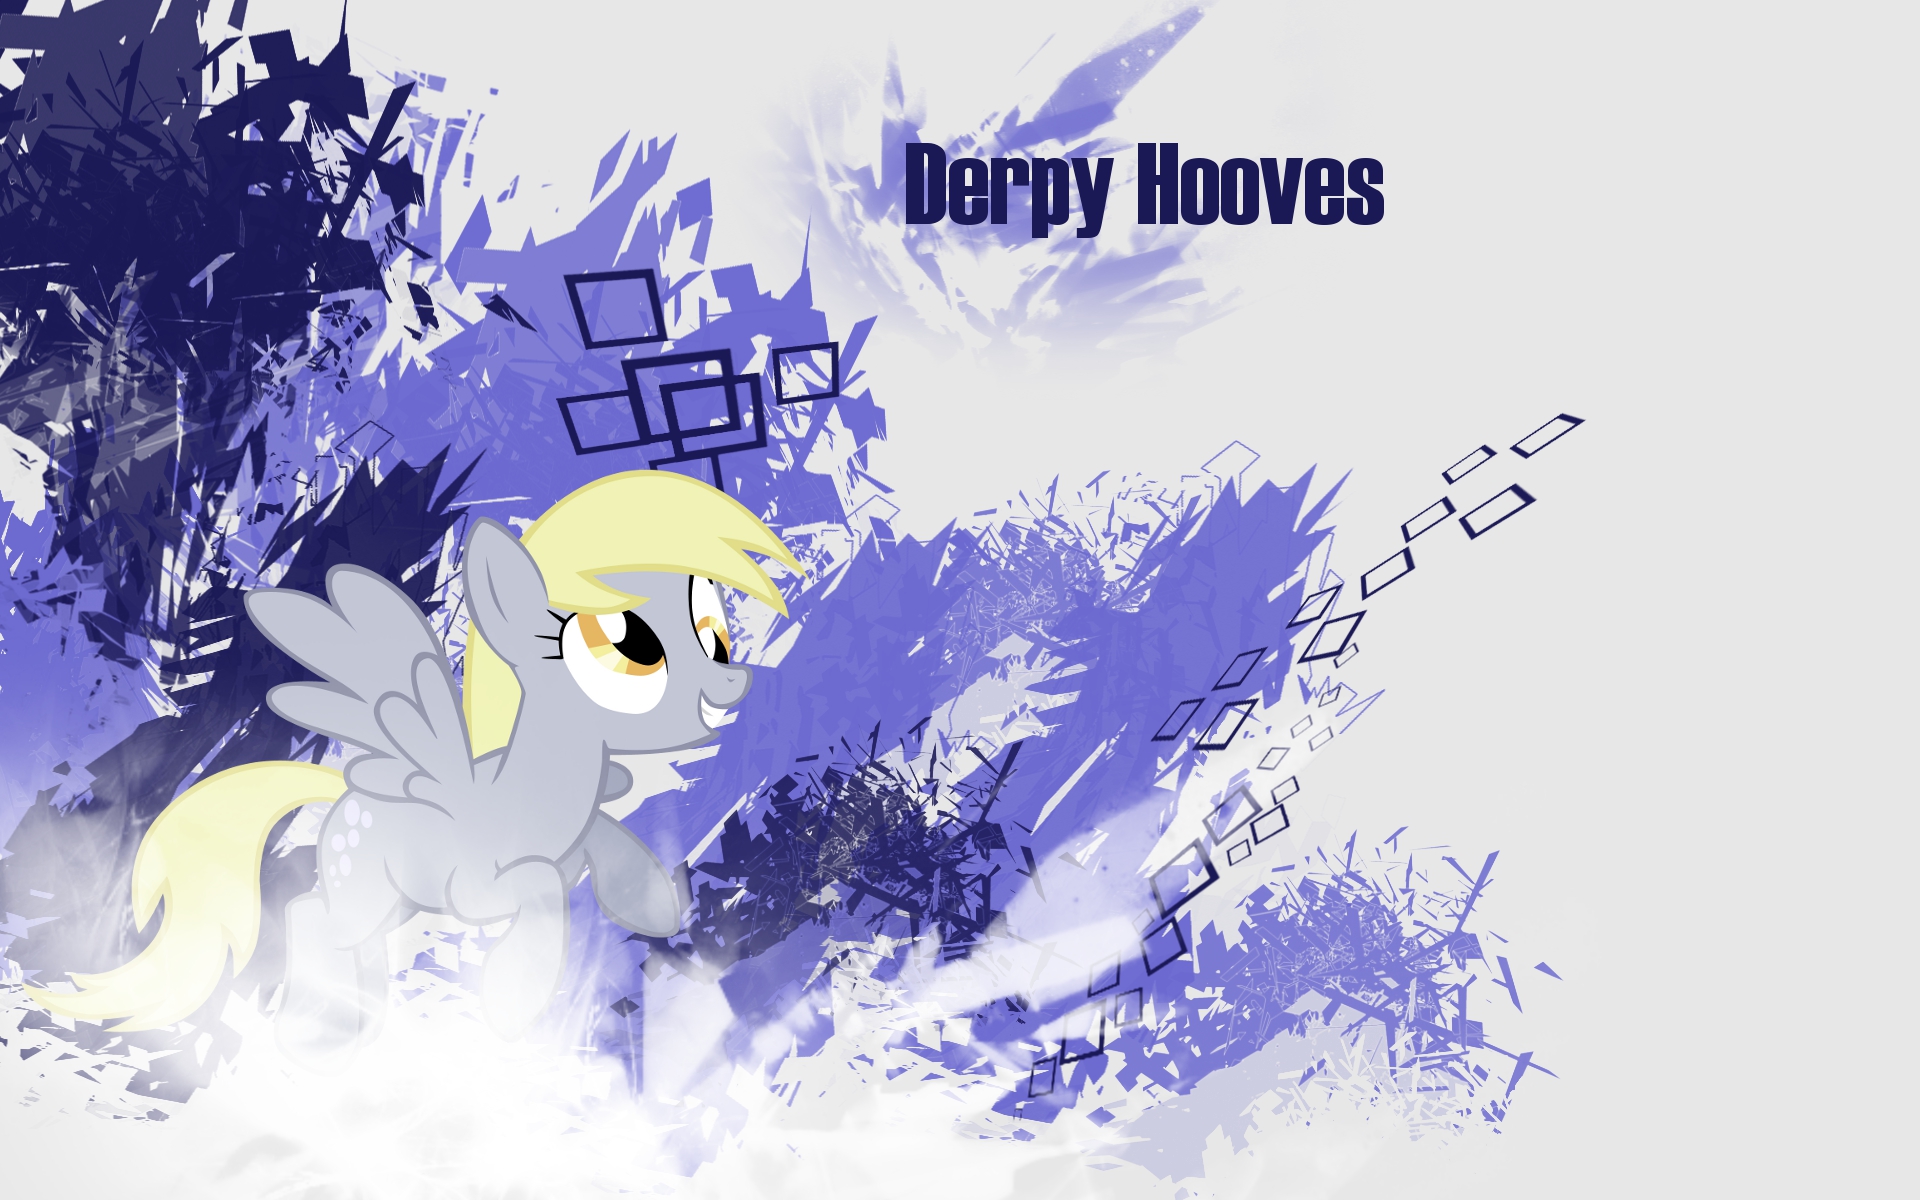 Derpy Hooves Wallpaper by DasinBoot and SierraEx